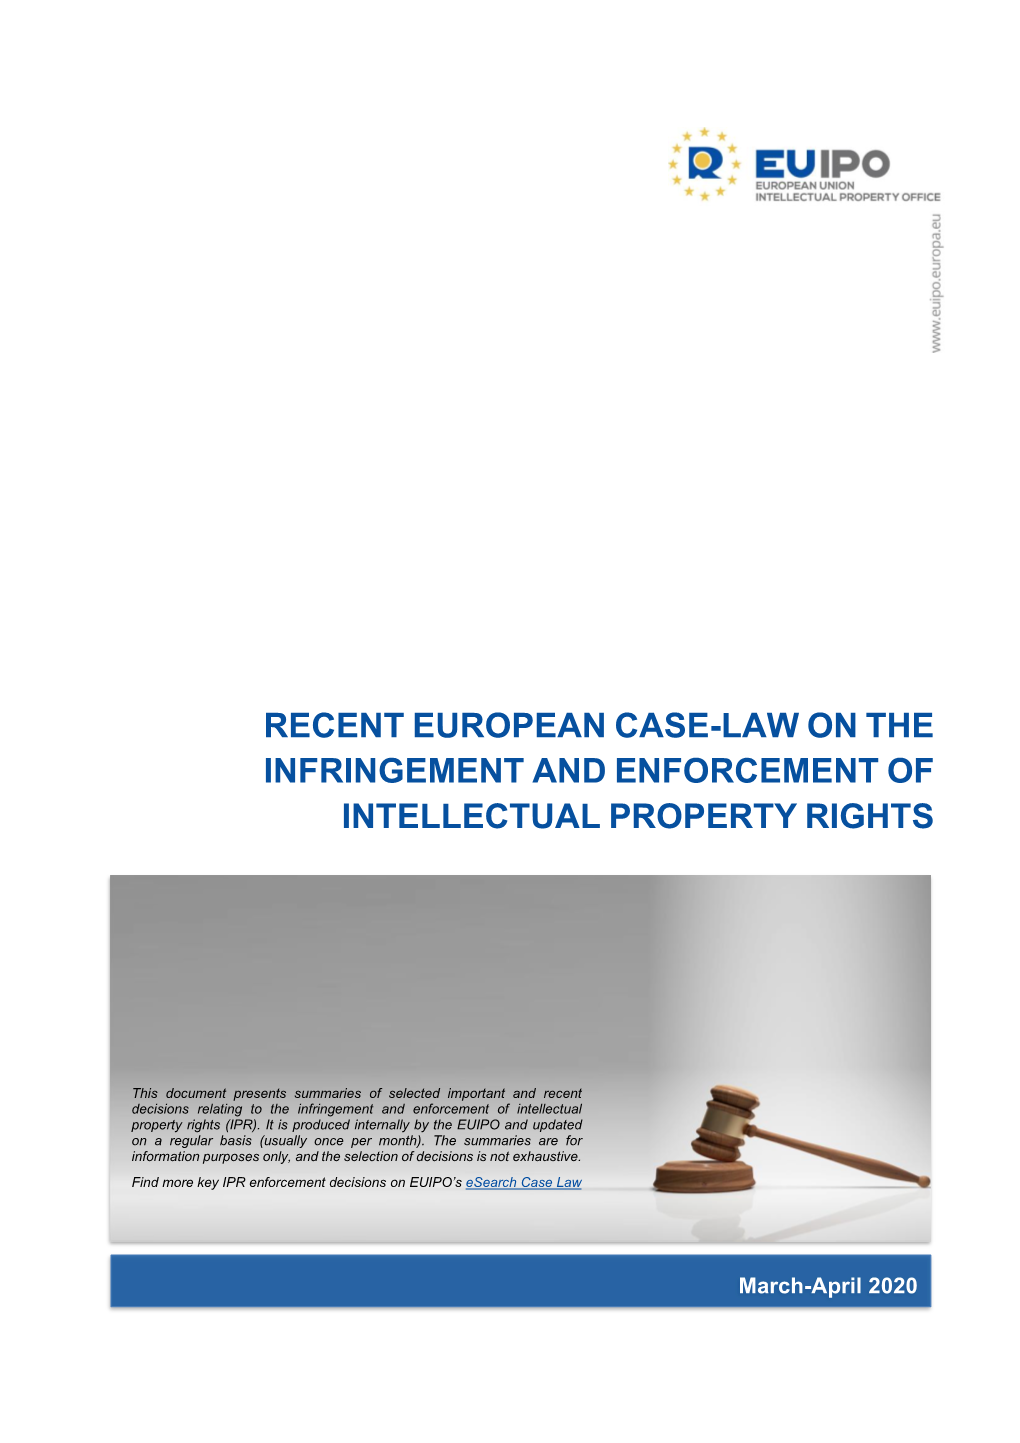 Recent European Case-Law on the Infringement and Enforcement of Intellectual Property Rights